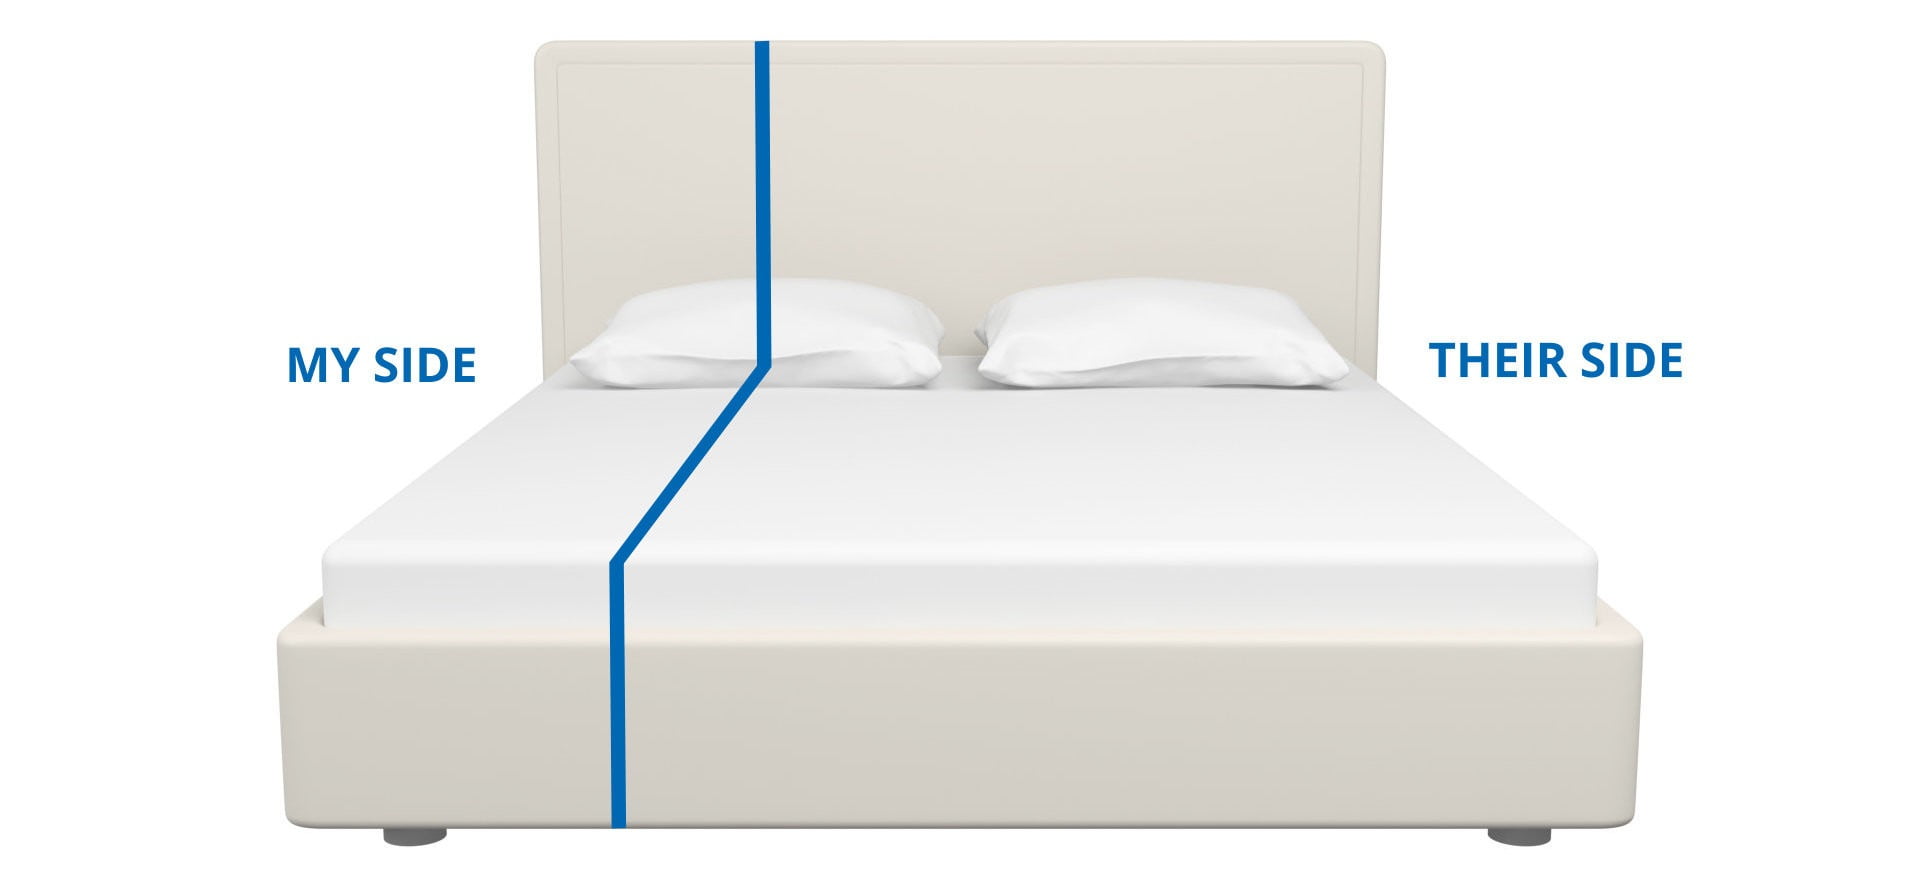 Bed Sizes Uk And Mattress Size, Is A Twin Bed Big Enough For One Person